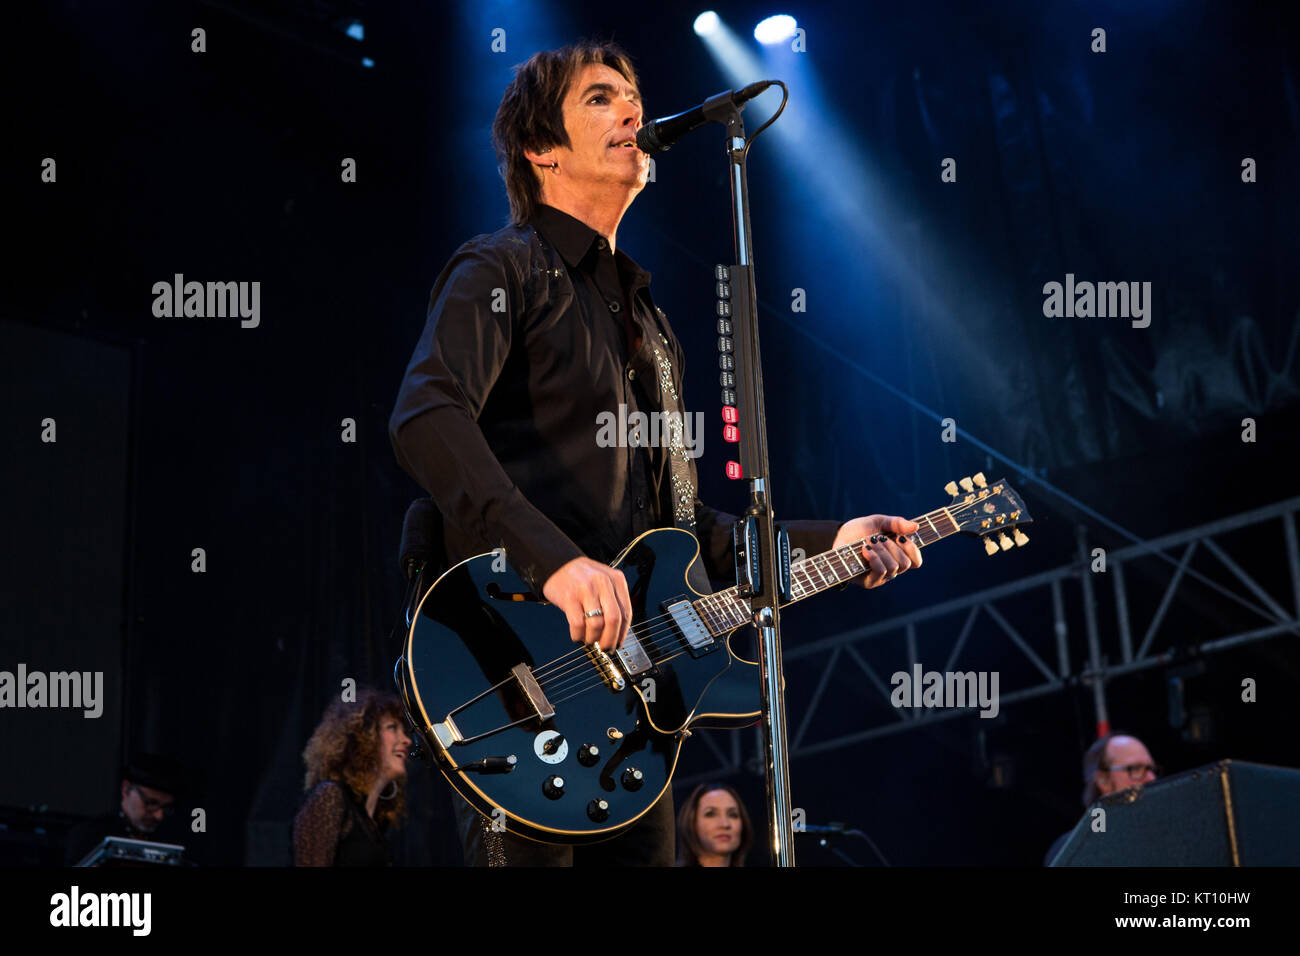 Norway, Fredrikstad – July 23, 2017. The Swedish singer, songwriter and musician Per Gessle performs a live concert during the Norwegian festival Månefestivalen 2017 in Fredrikstad. Per Gessle is formerly known from the Swedish pop duo Roxette. Stock Photo